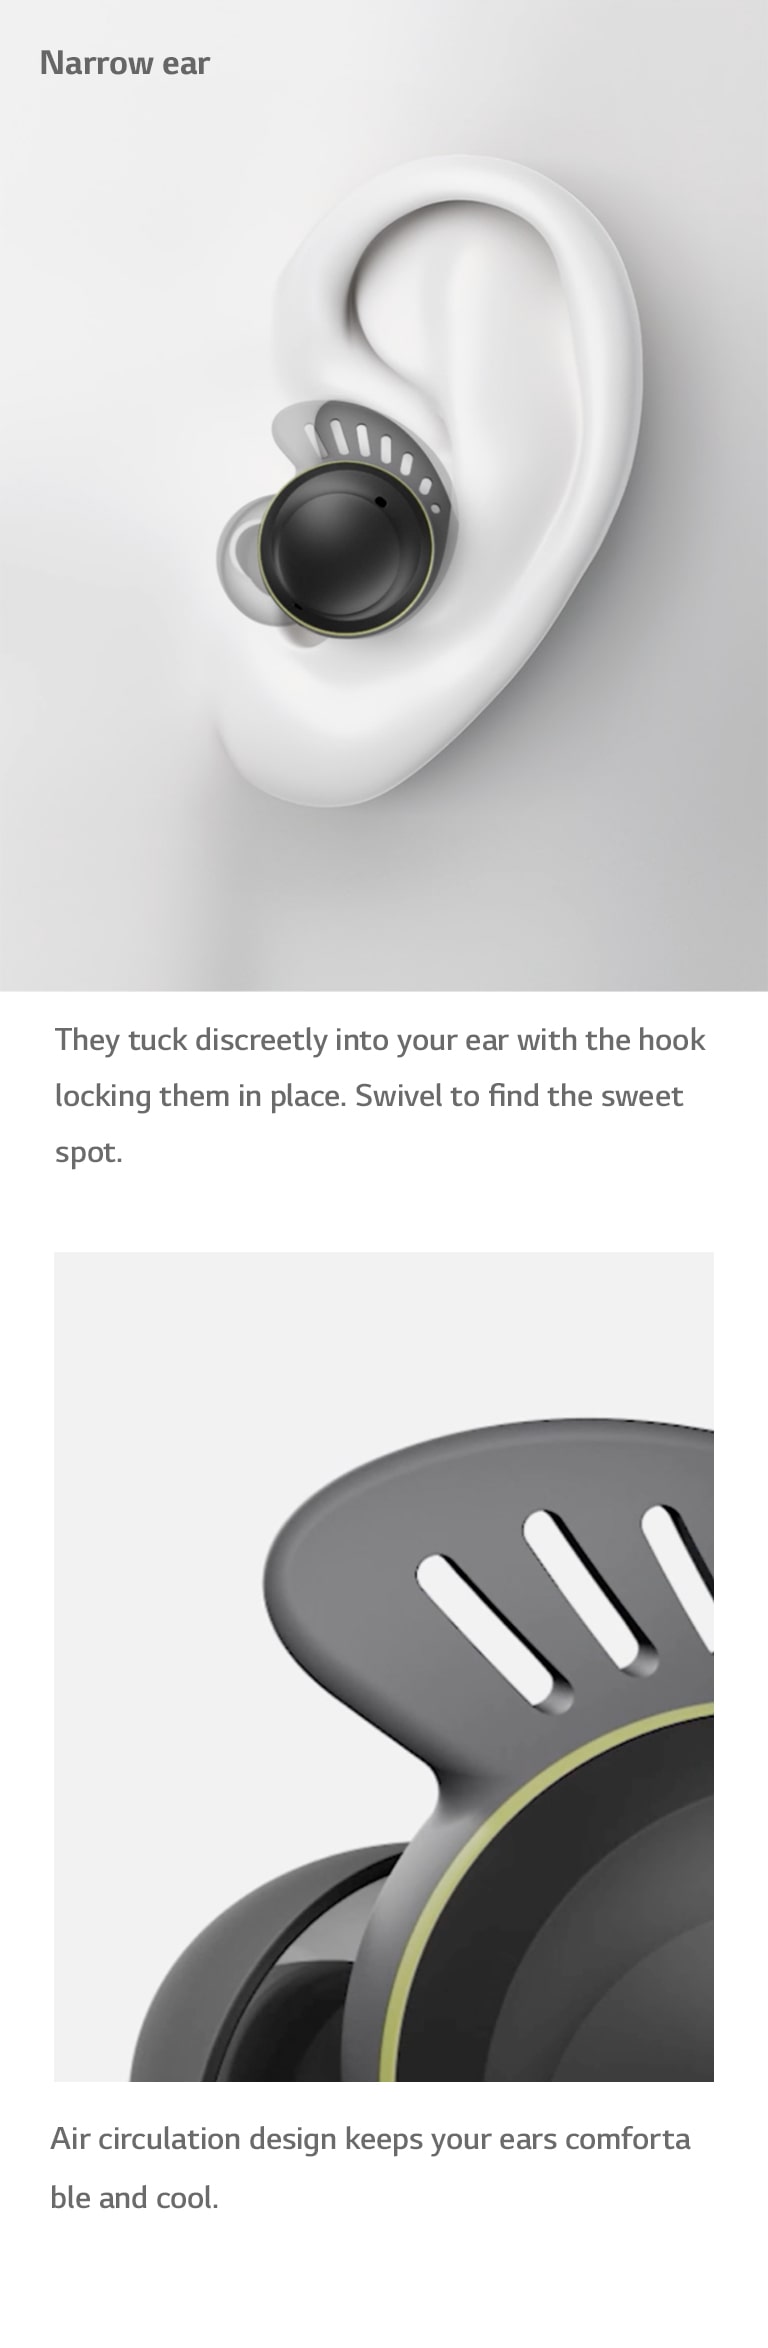 LG TONE-TF7Q In the video on the left, the earbuds are inserted into average, wide, and narrow ear shapes. The video on the right shows how air flows through the holes in the ear hook, for a pleasant, cooling feeling.